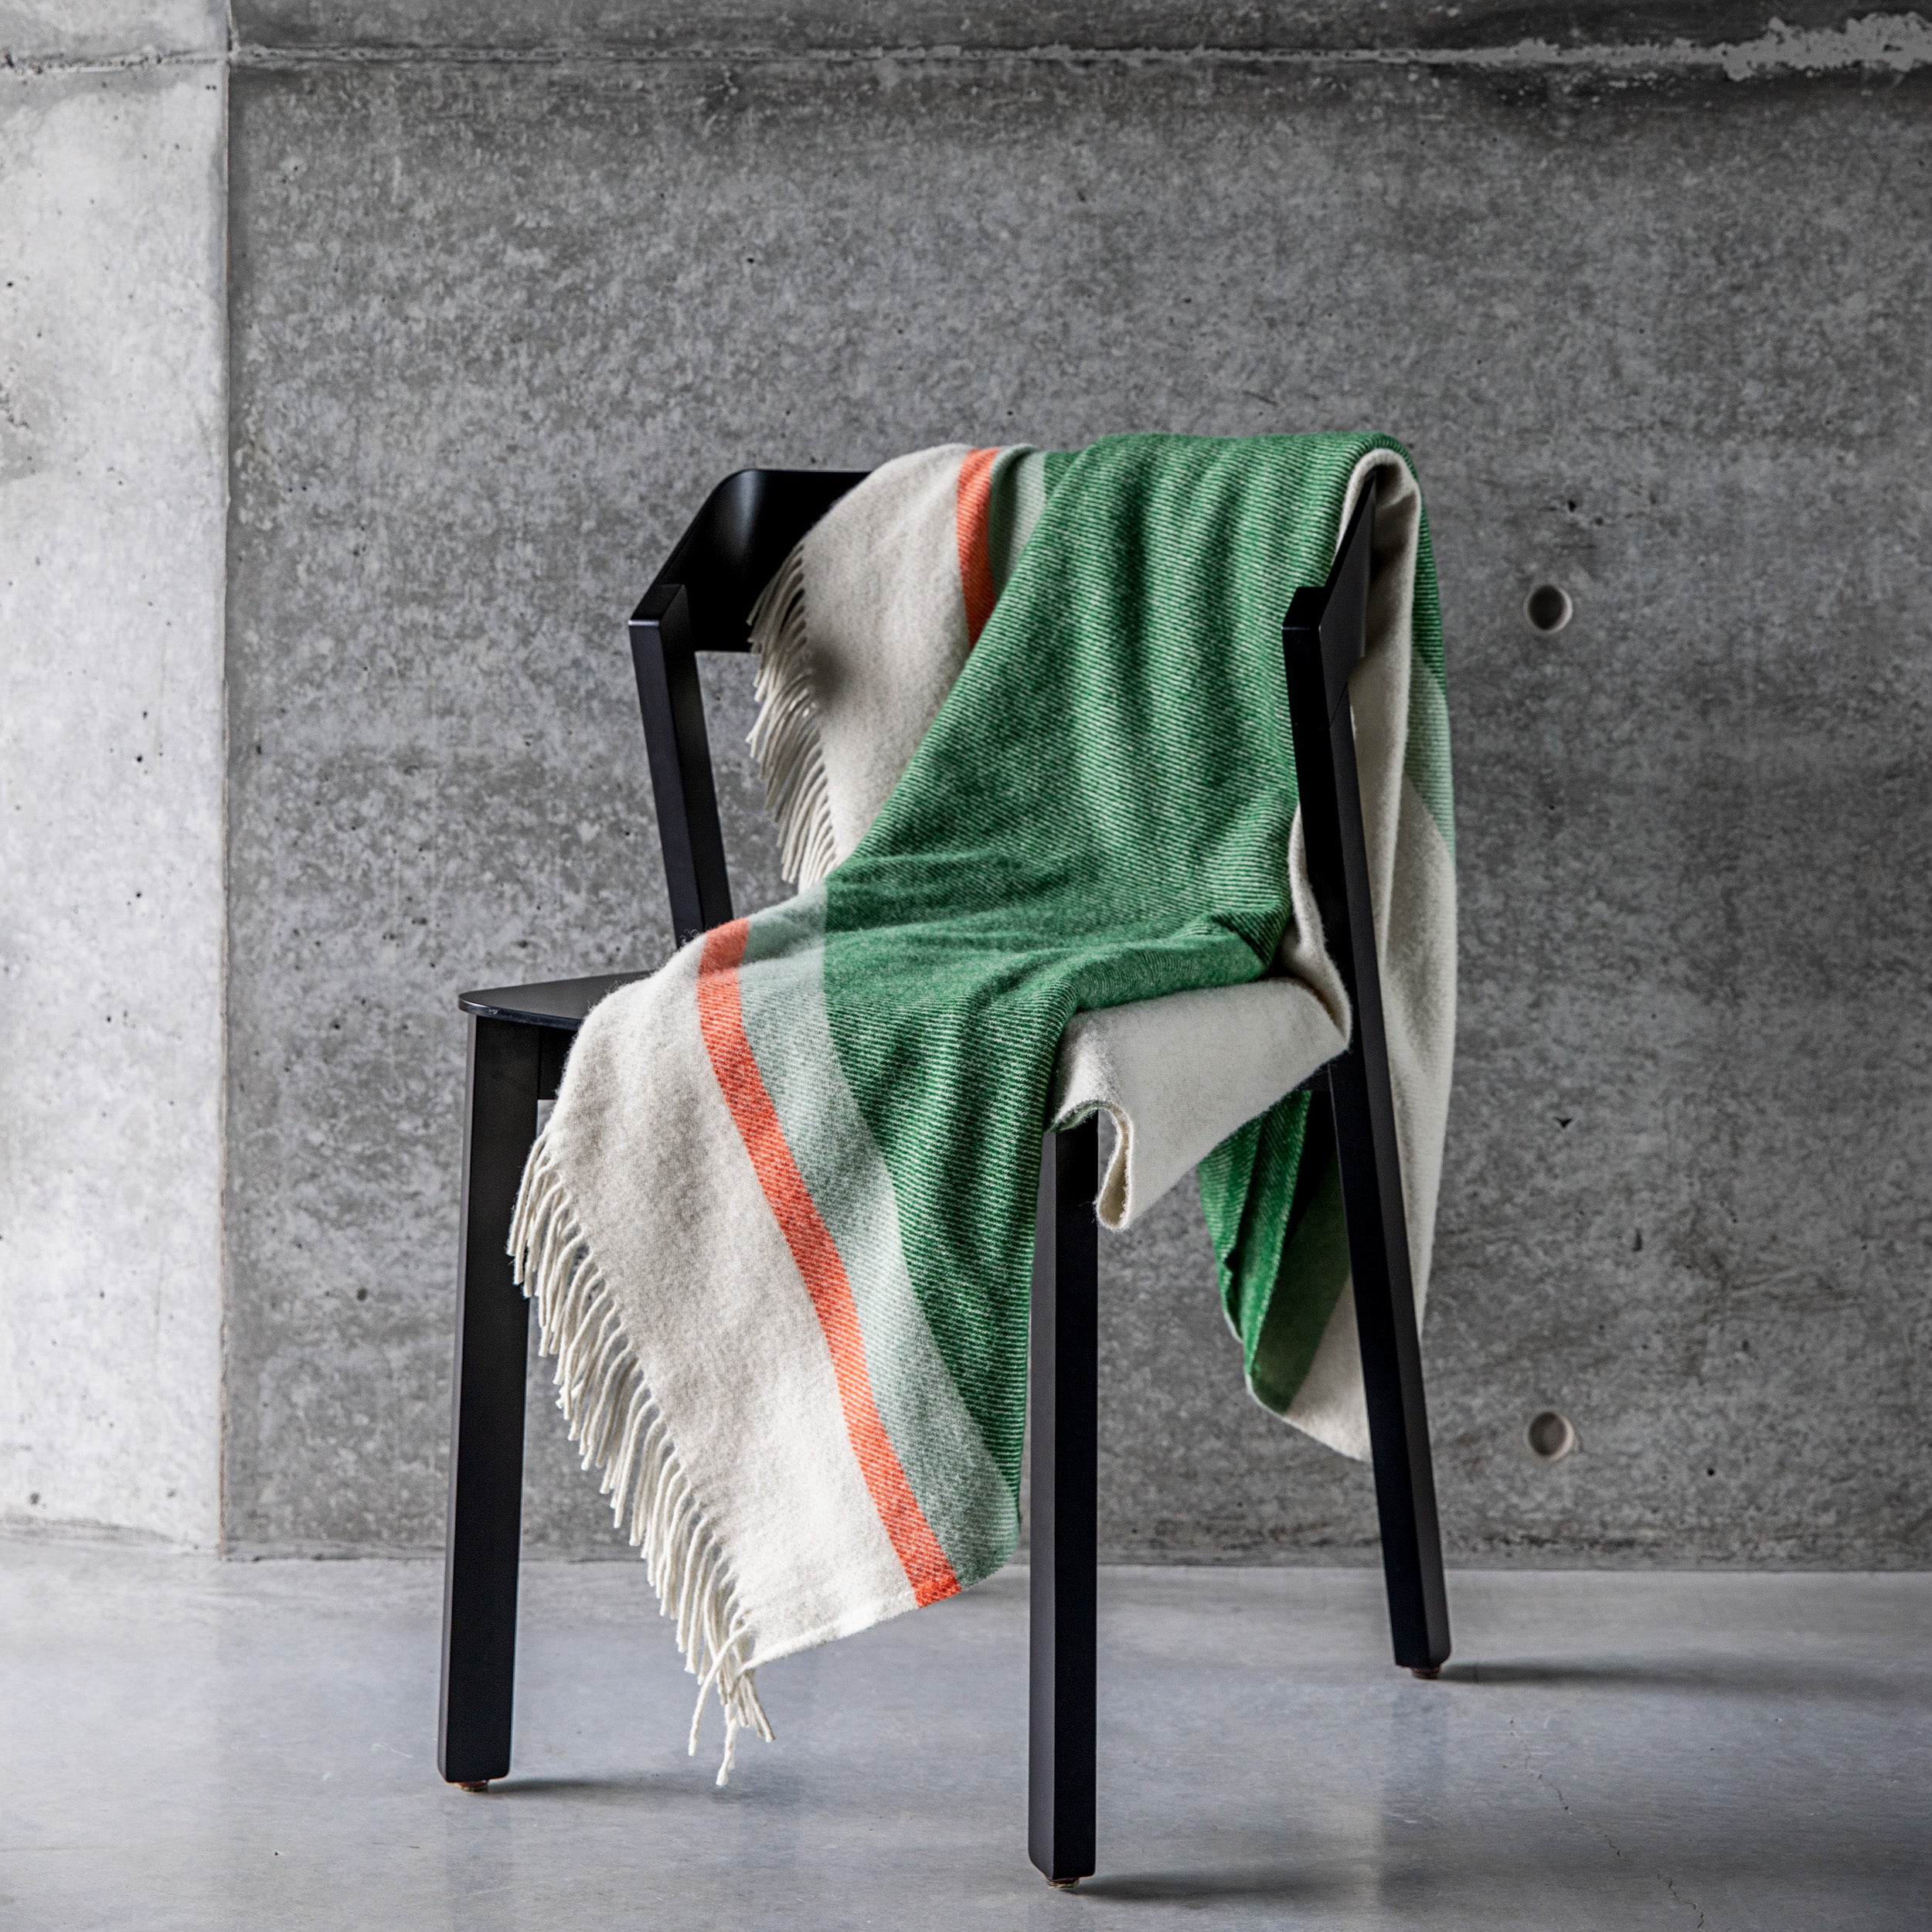 Riviera throw in mint draped over a chair.